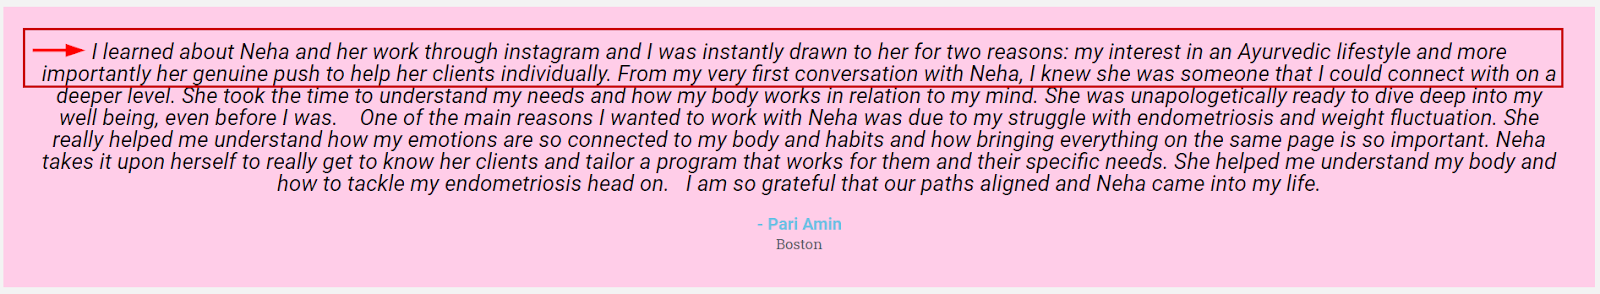 Testimonials from Neha’s clients prove that her niche Ayurvedic method was a well-welcomed niche.